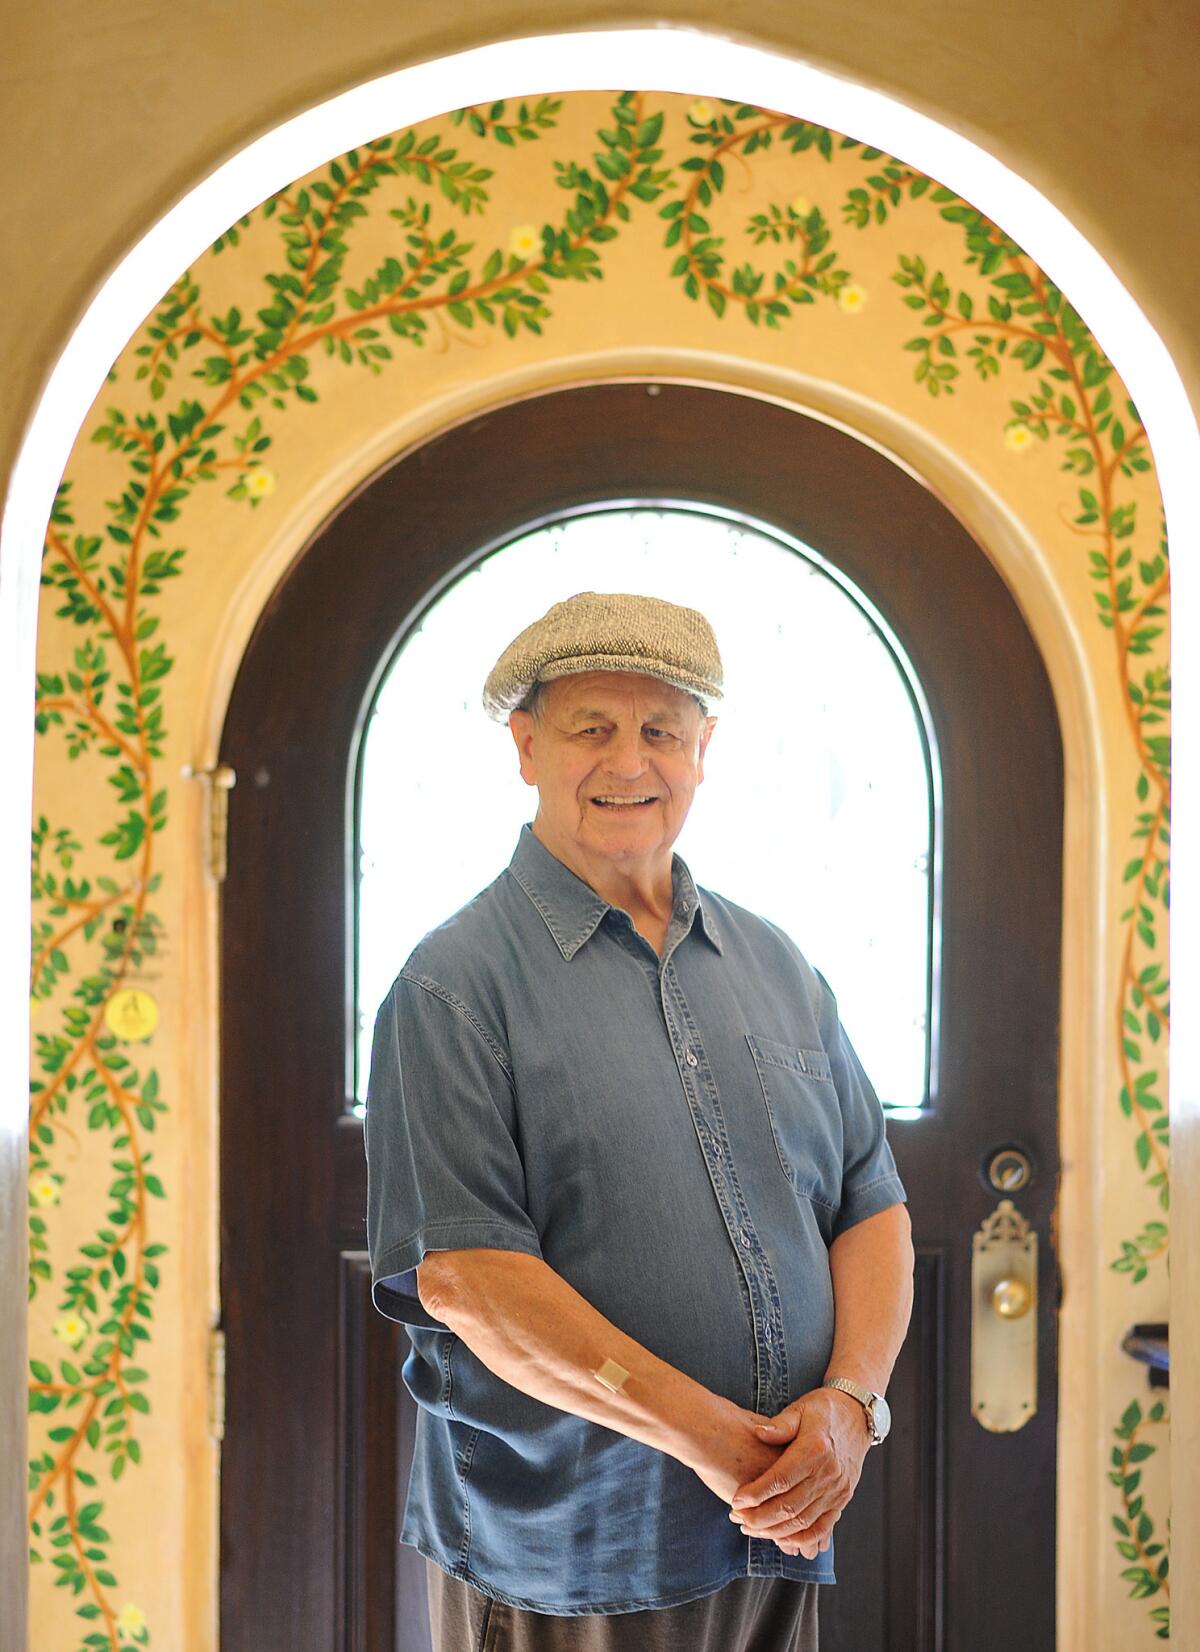 "Sometimes I'll be given the part of a father, and it's like a damp washcloth," says Paul Dooley, pictured at home in Toluca Lake. "'I'll wring everything I can out of it." (Christina House / For The Times)